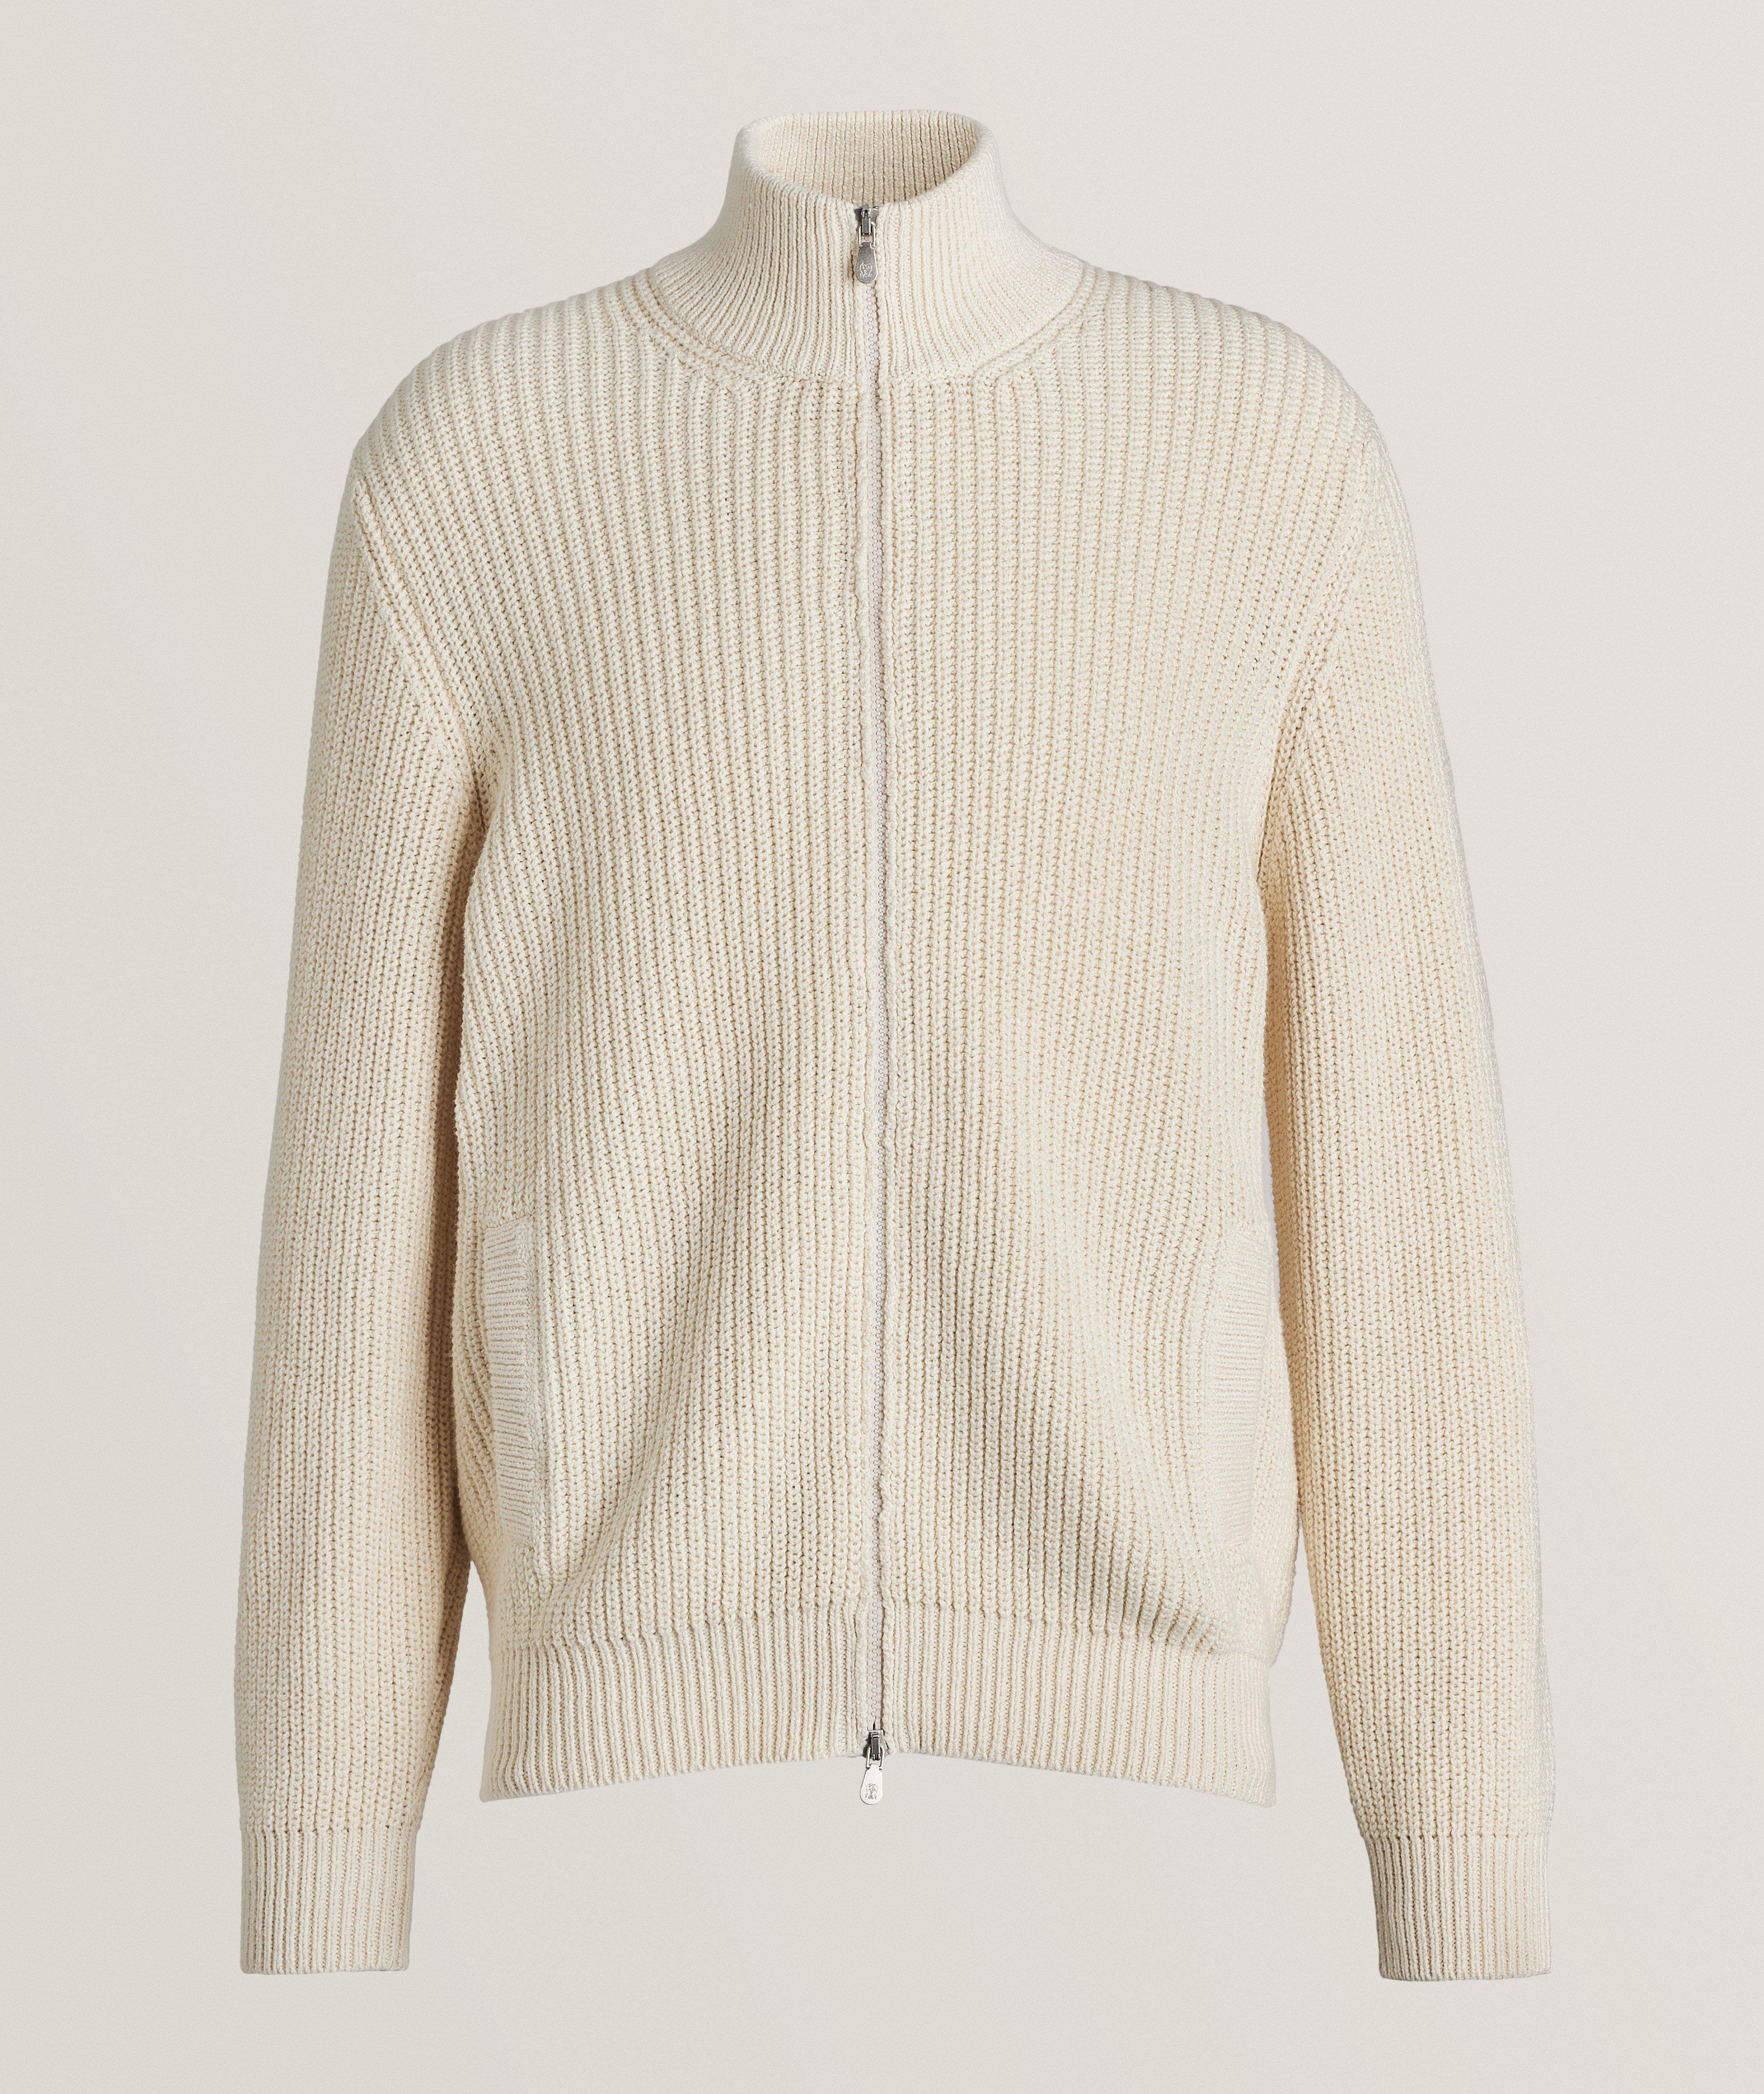 Ribbed Knit Cotton Sweater image 0